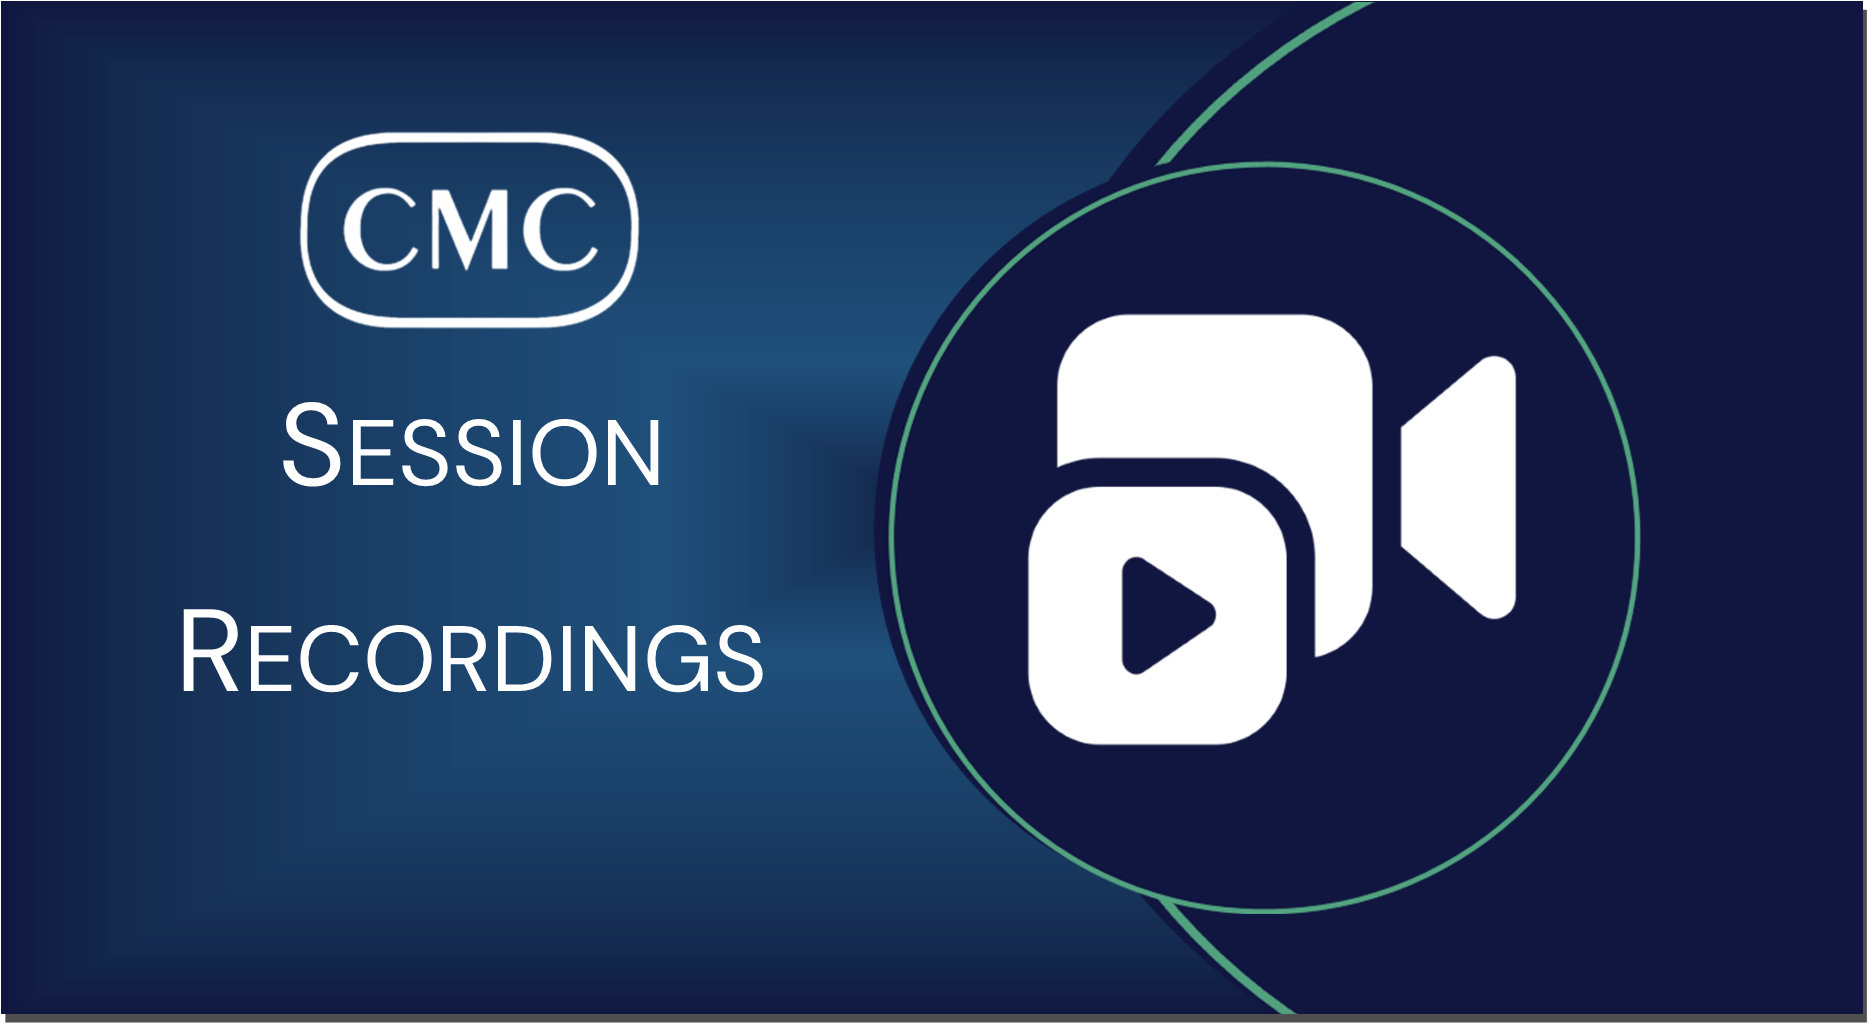 CMC-Ontario offers a on demand library of session recordings